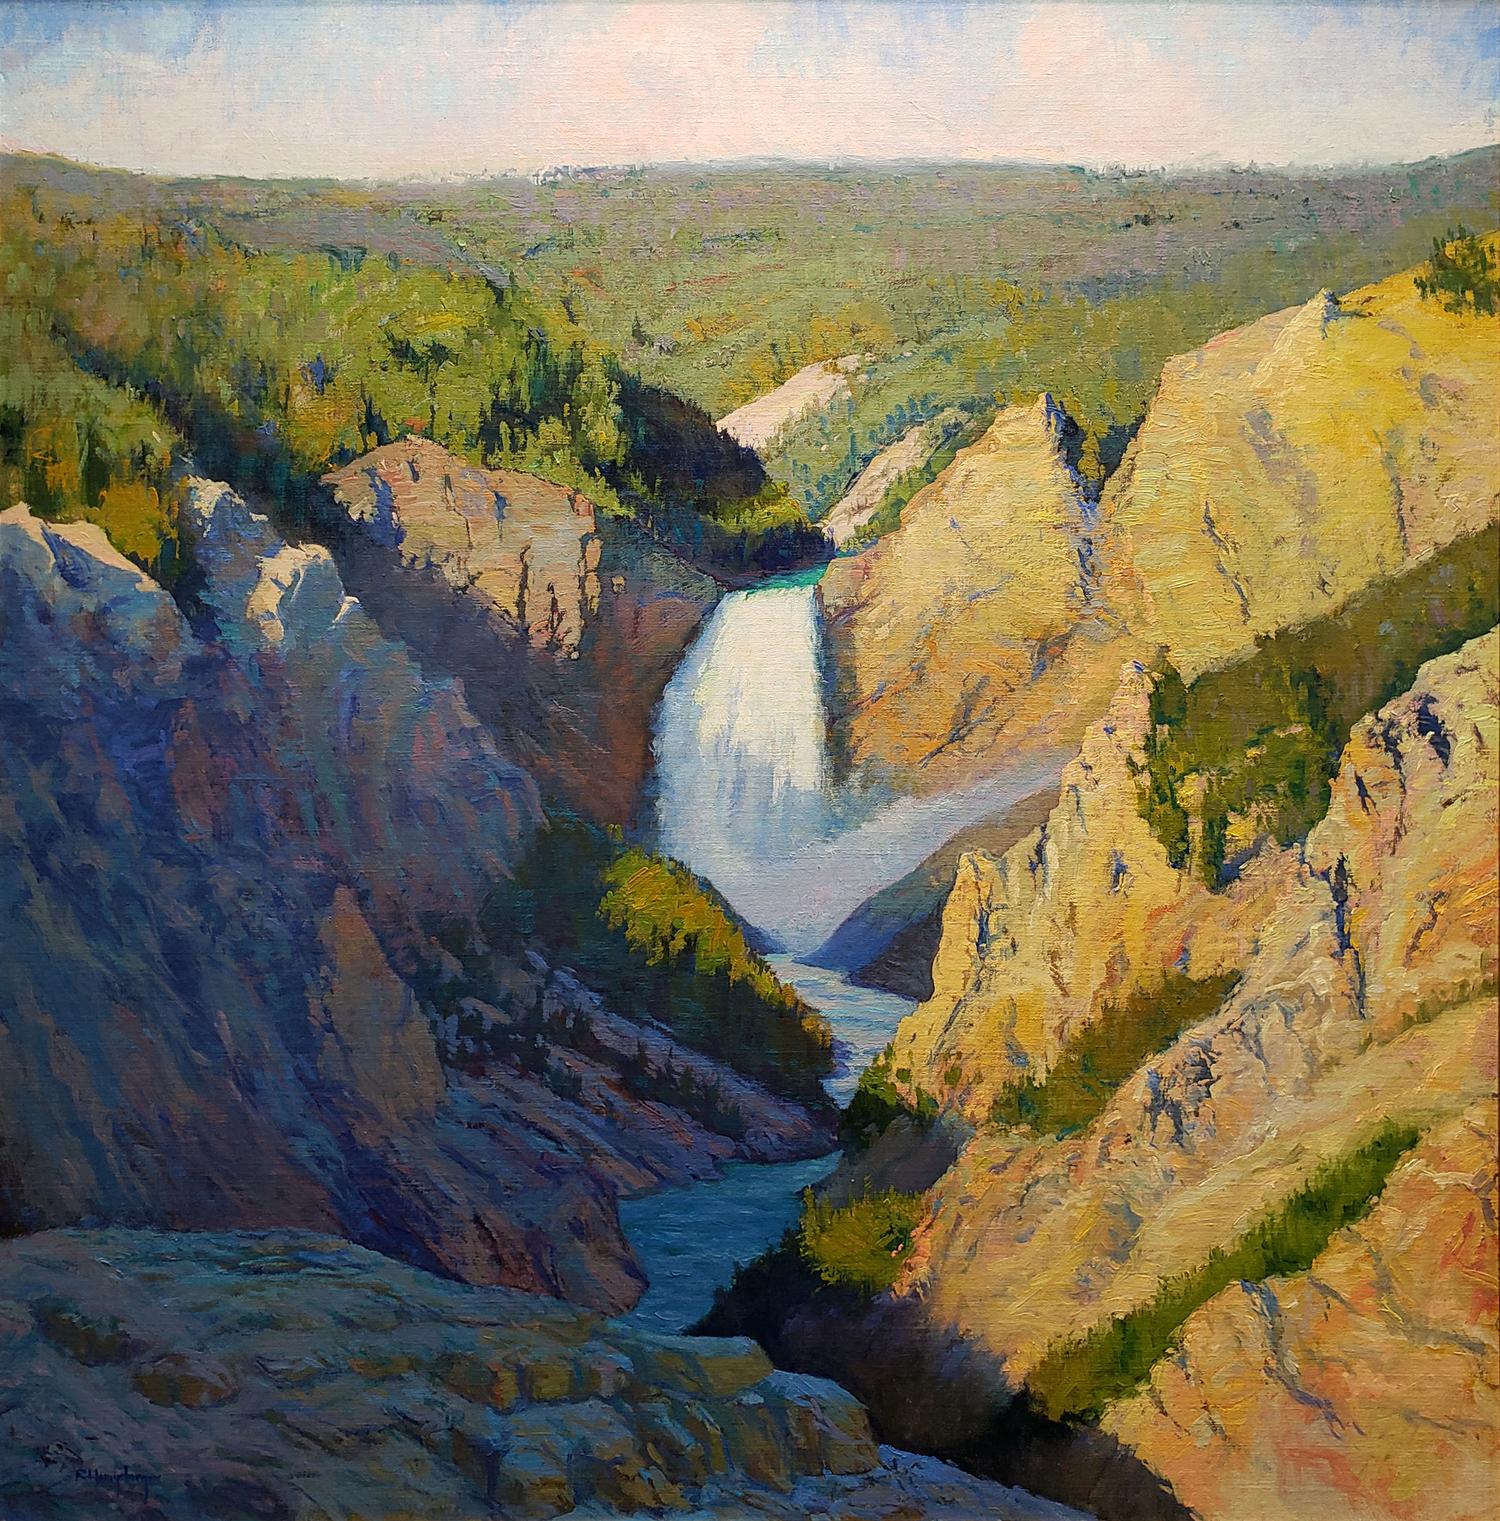 Morning Light on the Lower Falls, Yellowstone - Painting by Richard Humphrey